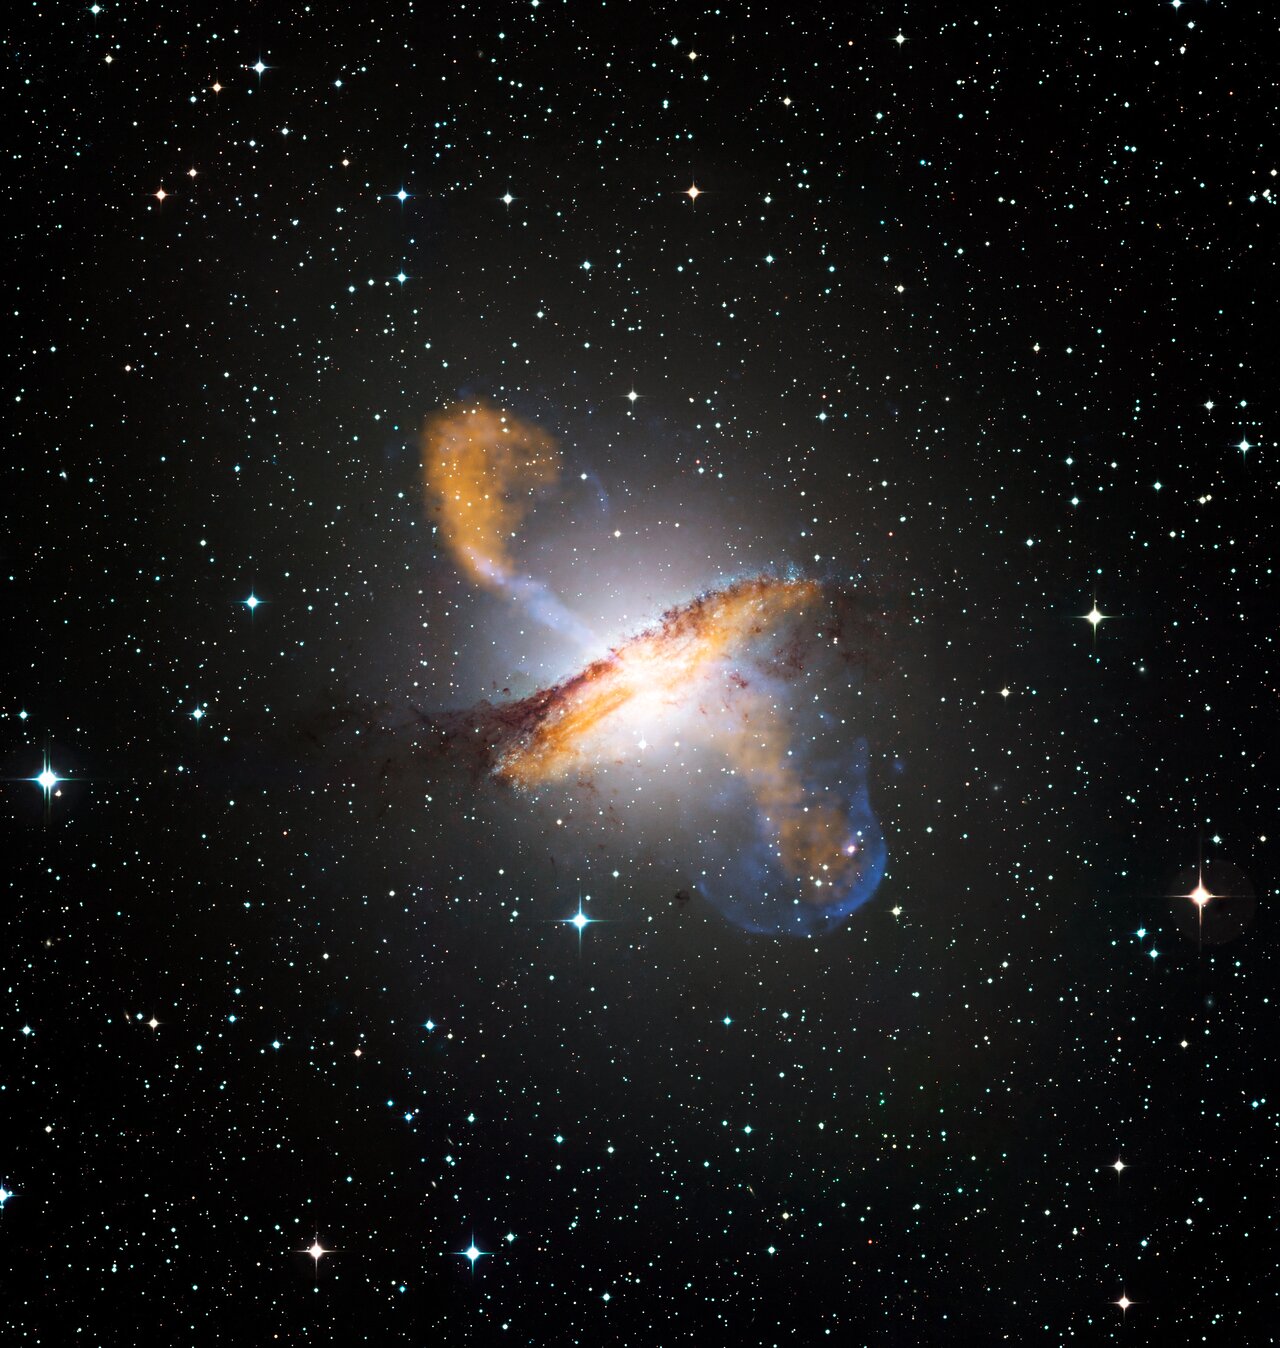 Composite of Centaurus A revealing lobes and jets from galaxy's black hole